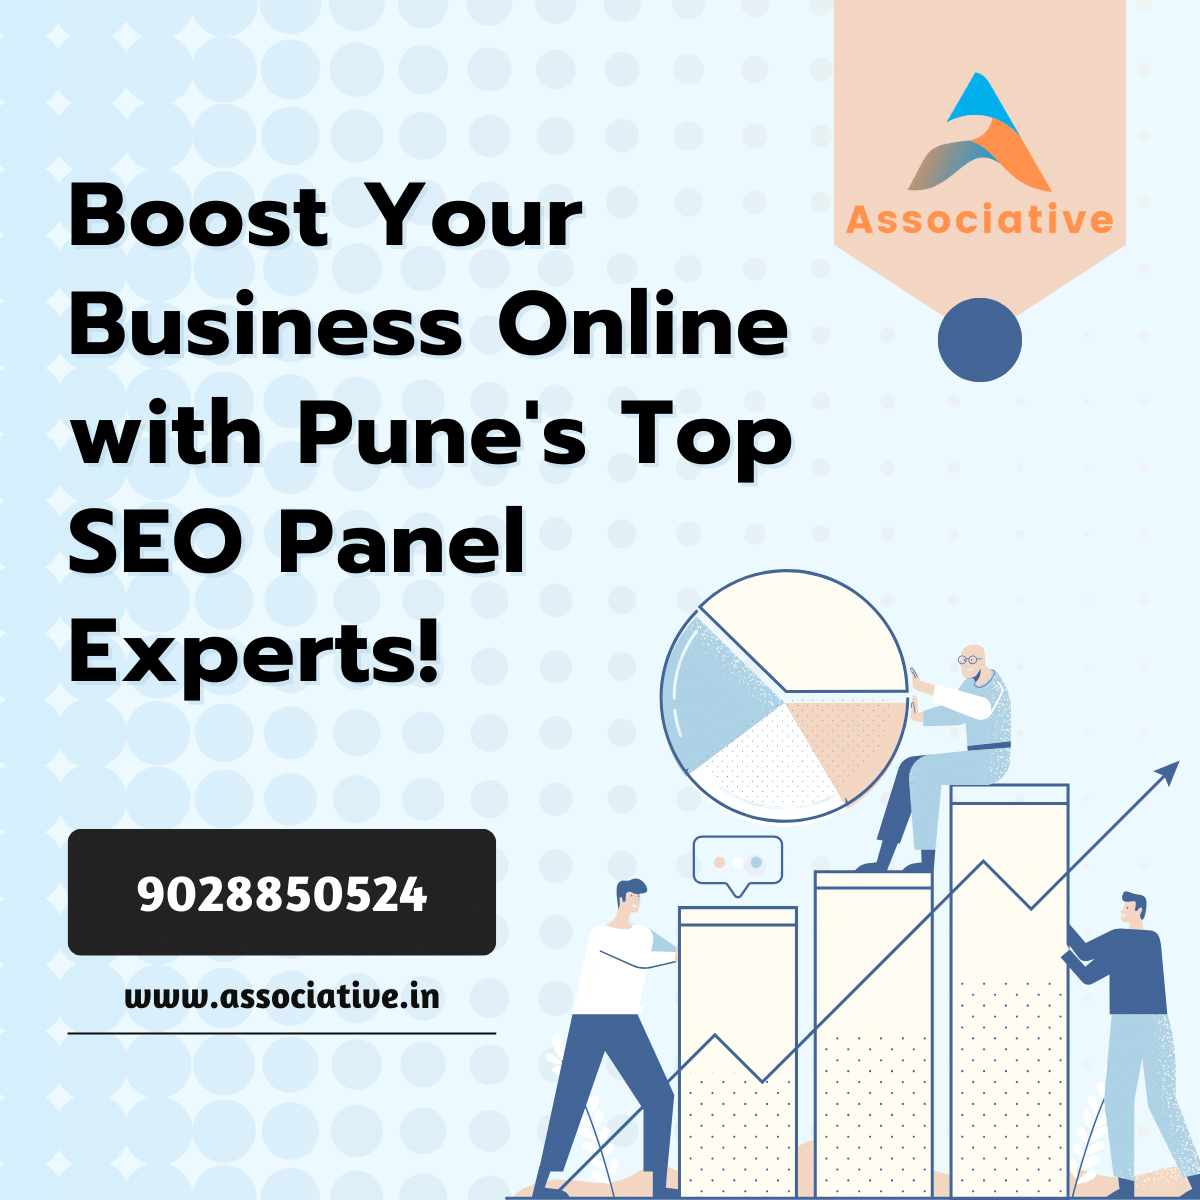 Boost Your Business Online with Pune's Top SEO Panel Experts!